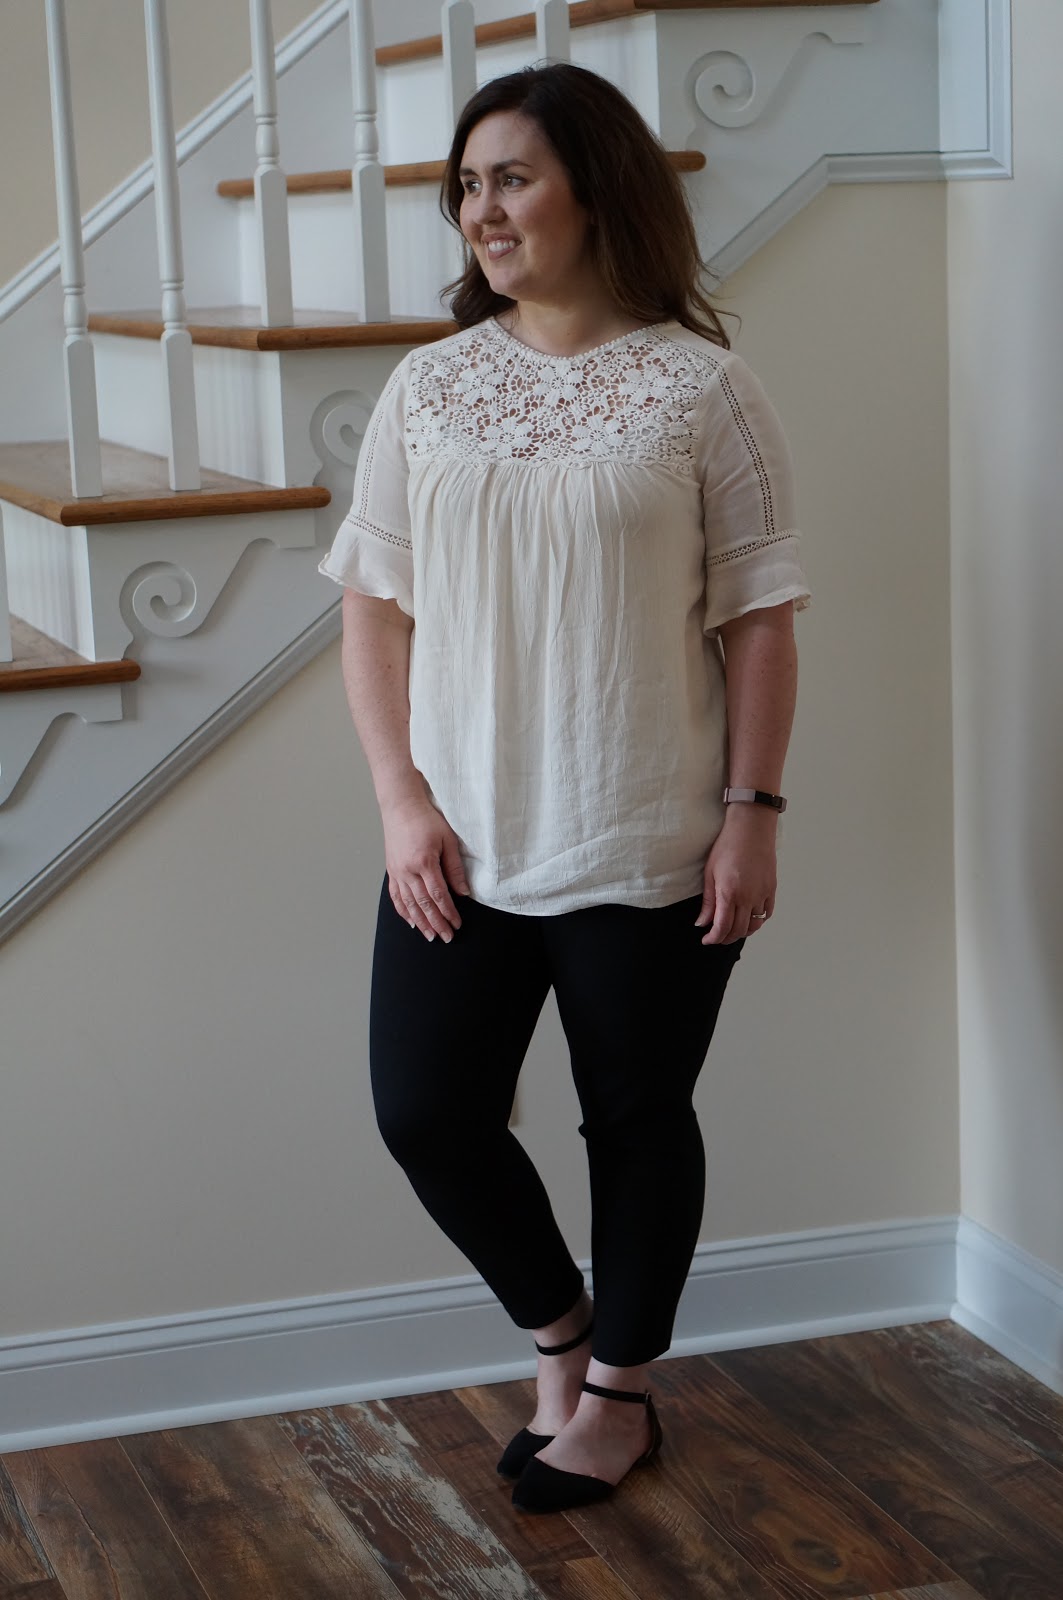 Popular North Carolina style blogger Rebecca Lately shares a gorgeous lace yoke detail top.  Click here to read about this summer appropriate work look!